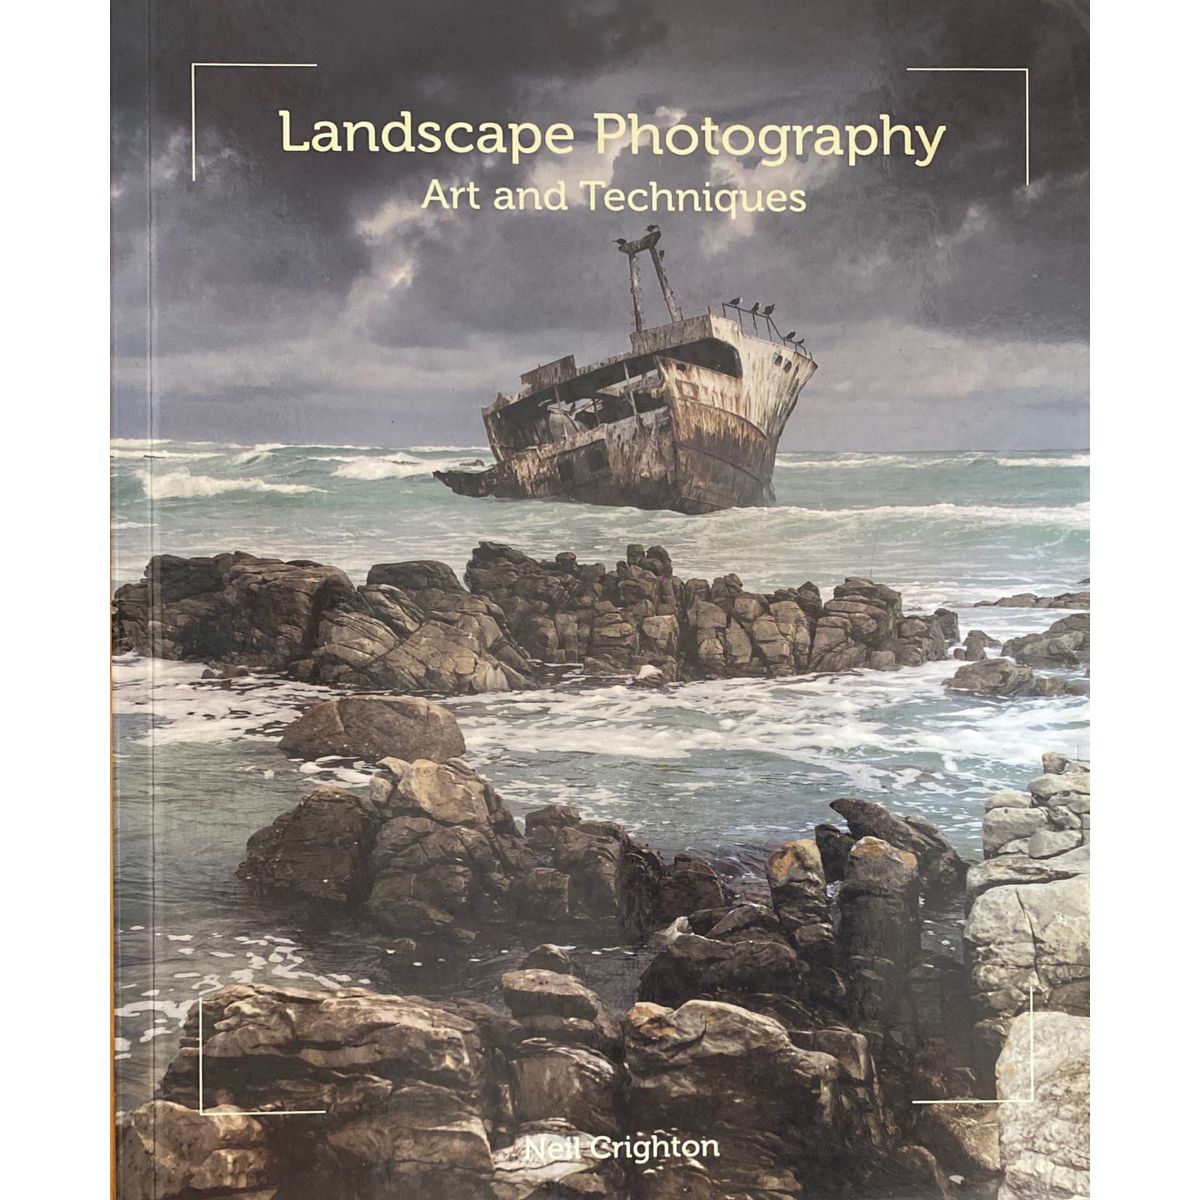 ISBN: 9781847973948 / 1847973949 - Landscape Photography: Art and Techniques by Neil Crighton [2013]